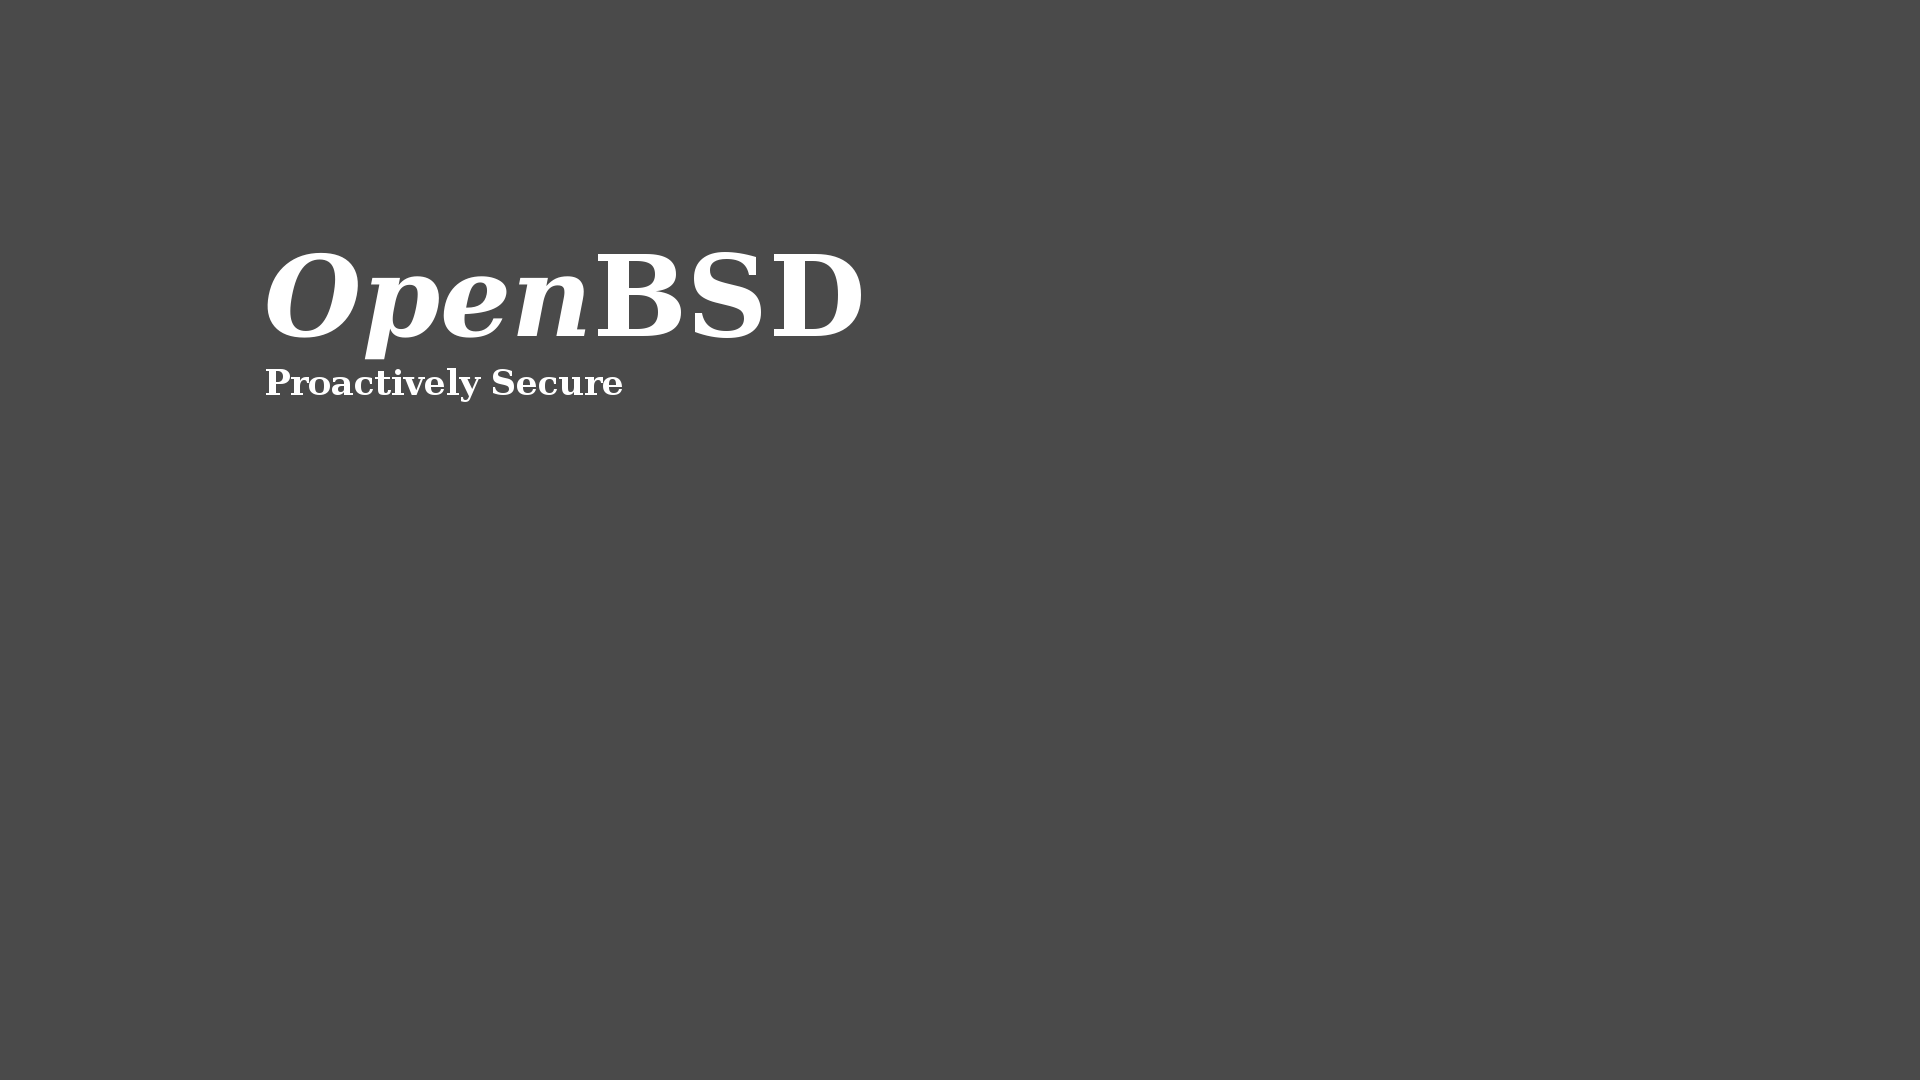 Openbsd Wallpaper I Made Going For Simple And Tasteful Someone